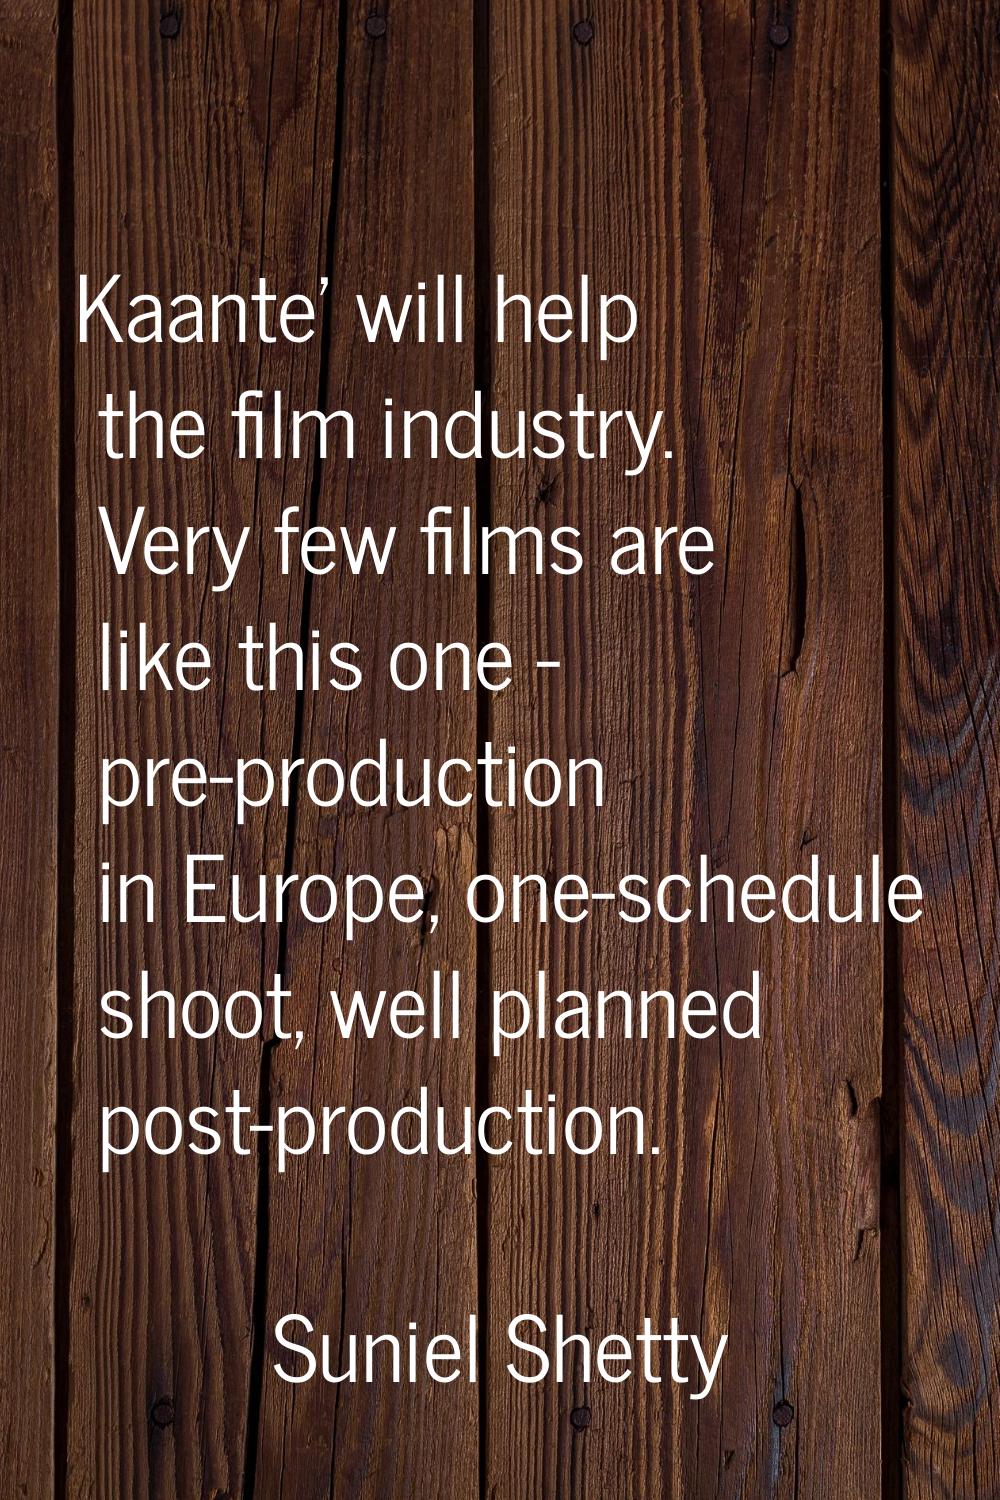 Kaante' will help the film industry. Very few films are like this one - pre-production in Europe, o